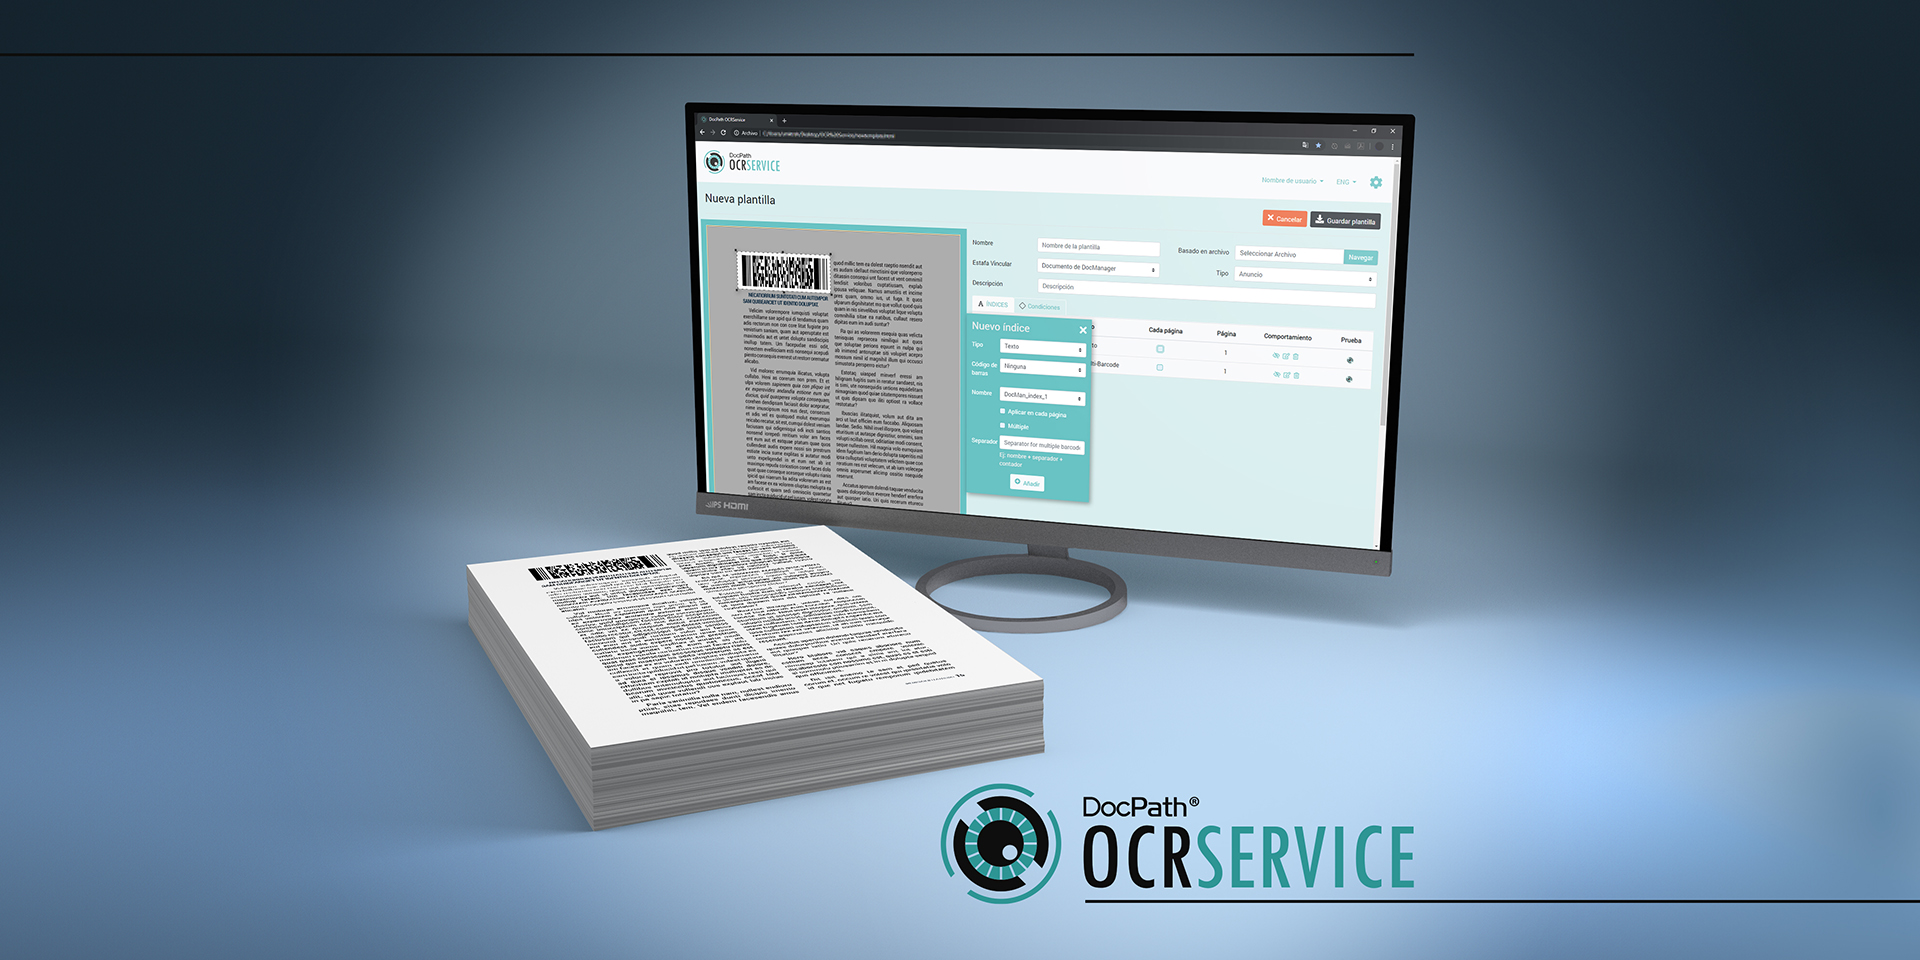 This OCR (Optical Character Recognition) document scanning service automatically extracts information from documents for later use.